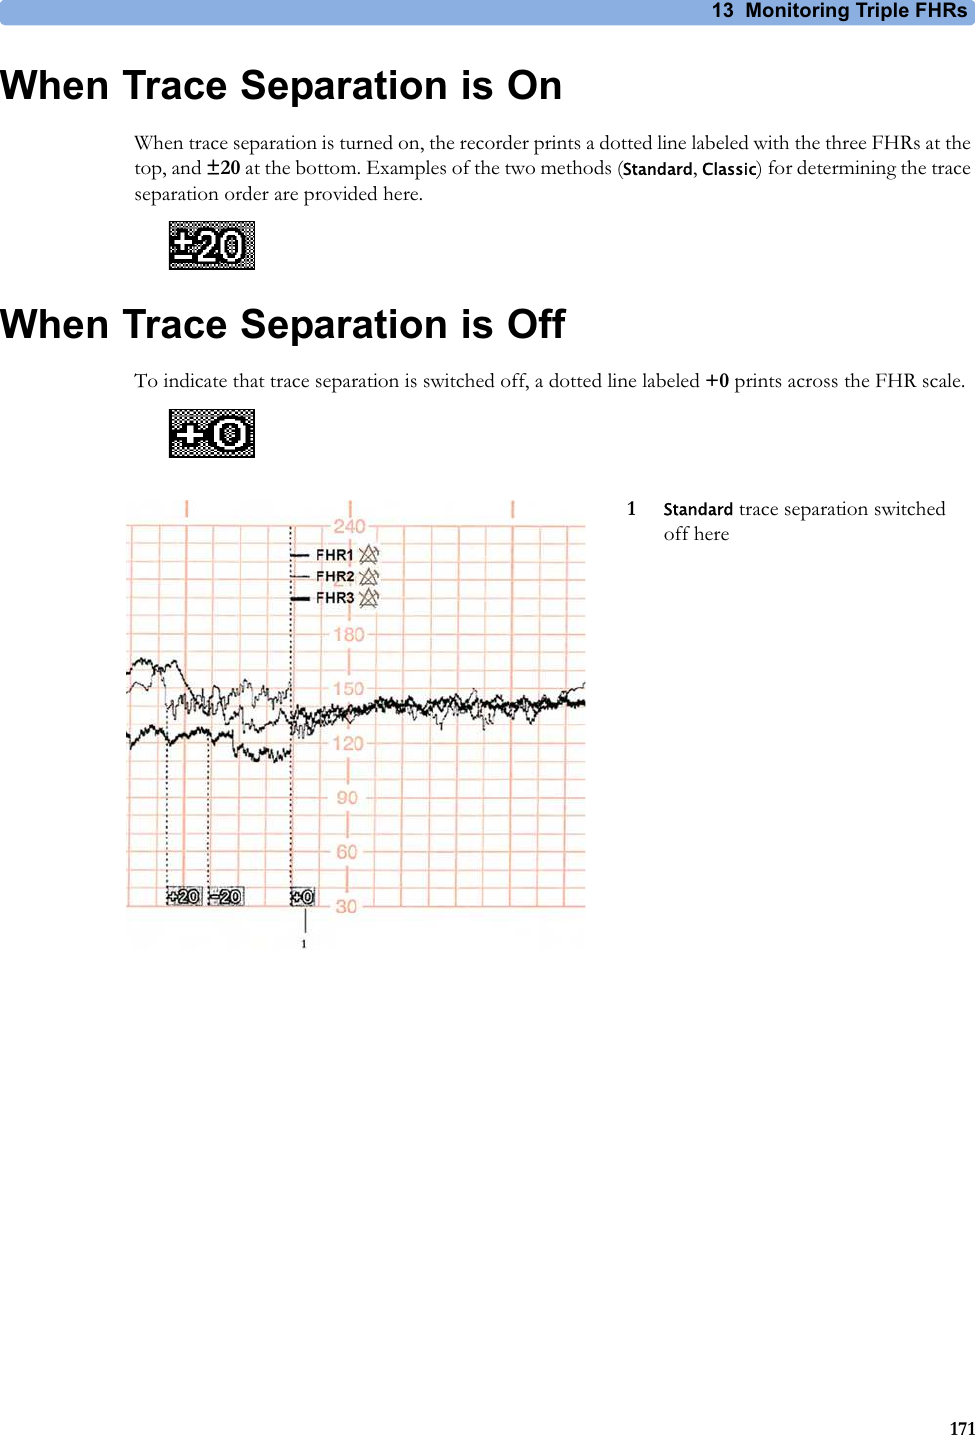 13  Monitoring Triple FHRs171When Trace Separation is OnWhen trace separation is turned on, the recorder prints a dotted line labeled with the three FHRs at the top, and ±20 at the bottom. Examples of the two methods (Standard, Classic) for determining the trace separation order are provided here.When Trace Separation is OffTo indicate that trace separation is switched off, a dotted line labeled +0 prints across the FHR scale.1Standard trace separation switched off here